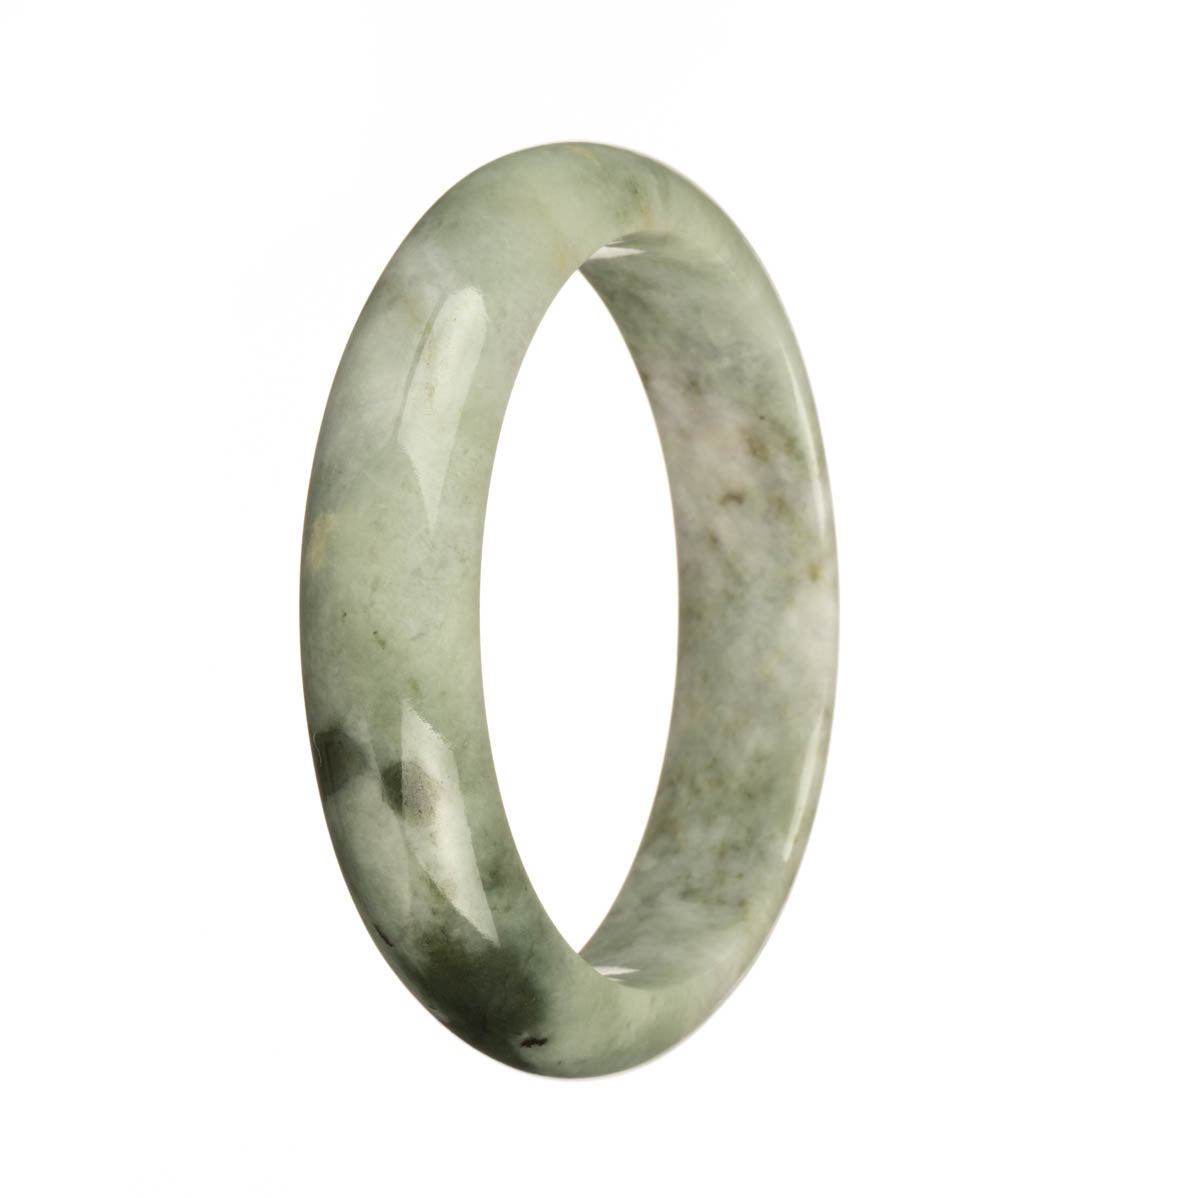 Authentic Natural Grey with Dark Green Patterns and Brown Patches Jadeite Jade Bangle - 59mm Half Moon